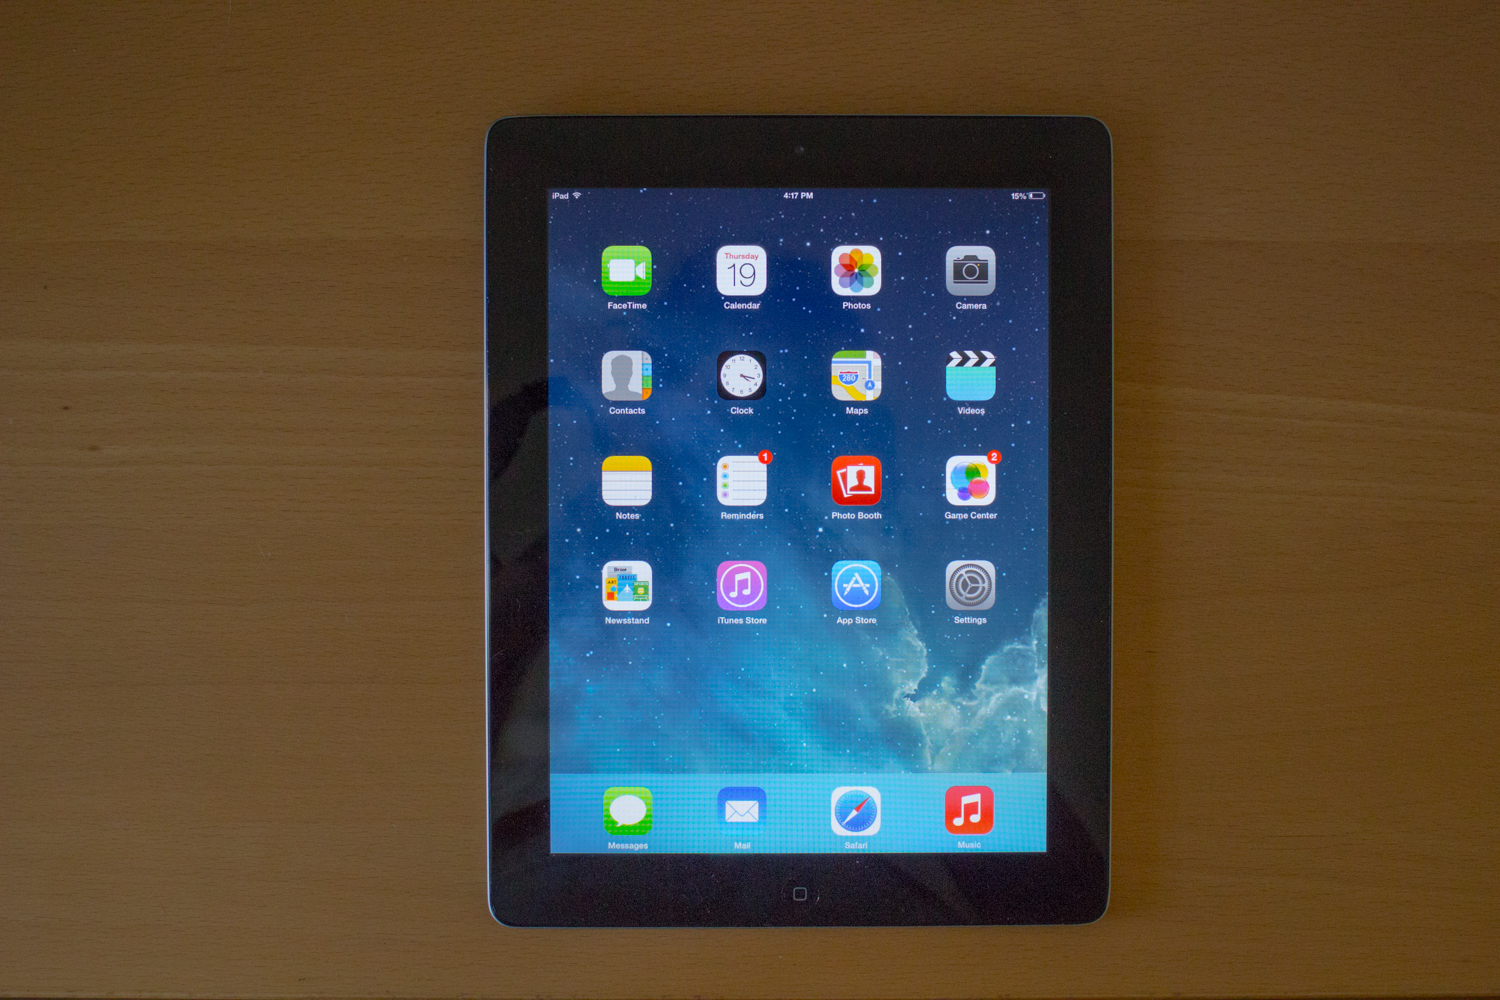 Let Me Down Apple IOS 7 On The IPad 2 Ars Technica. How To Fix Ios 